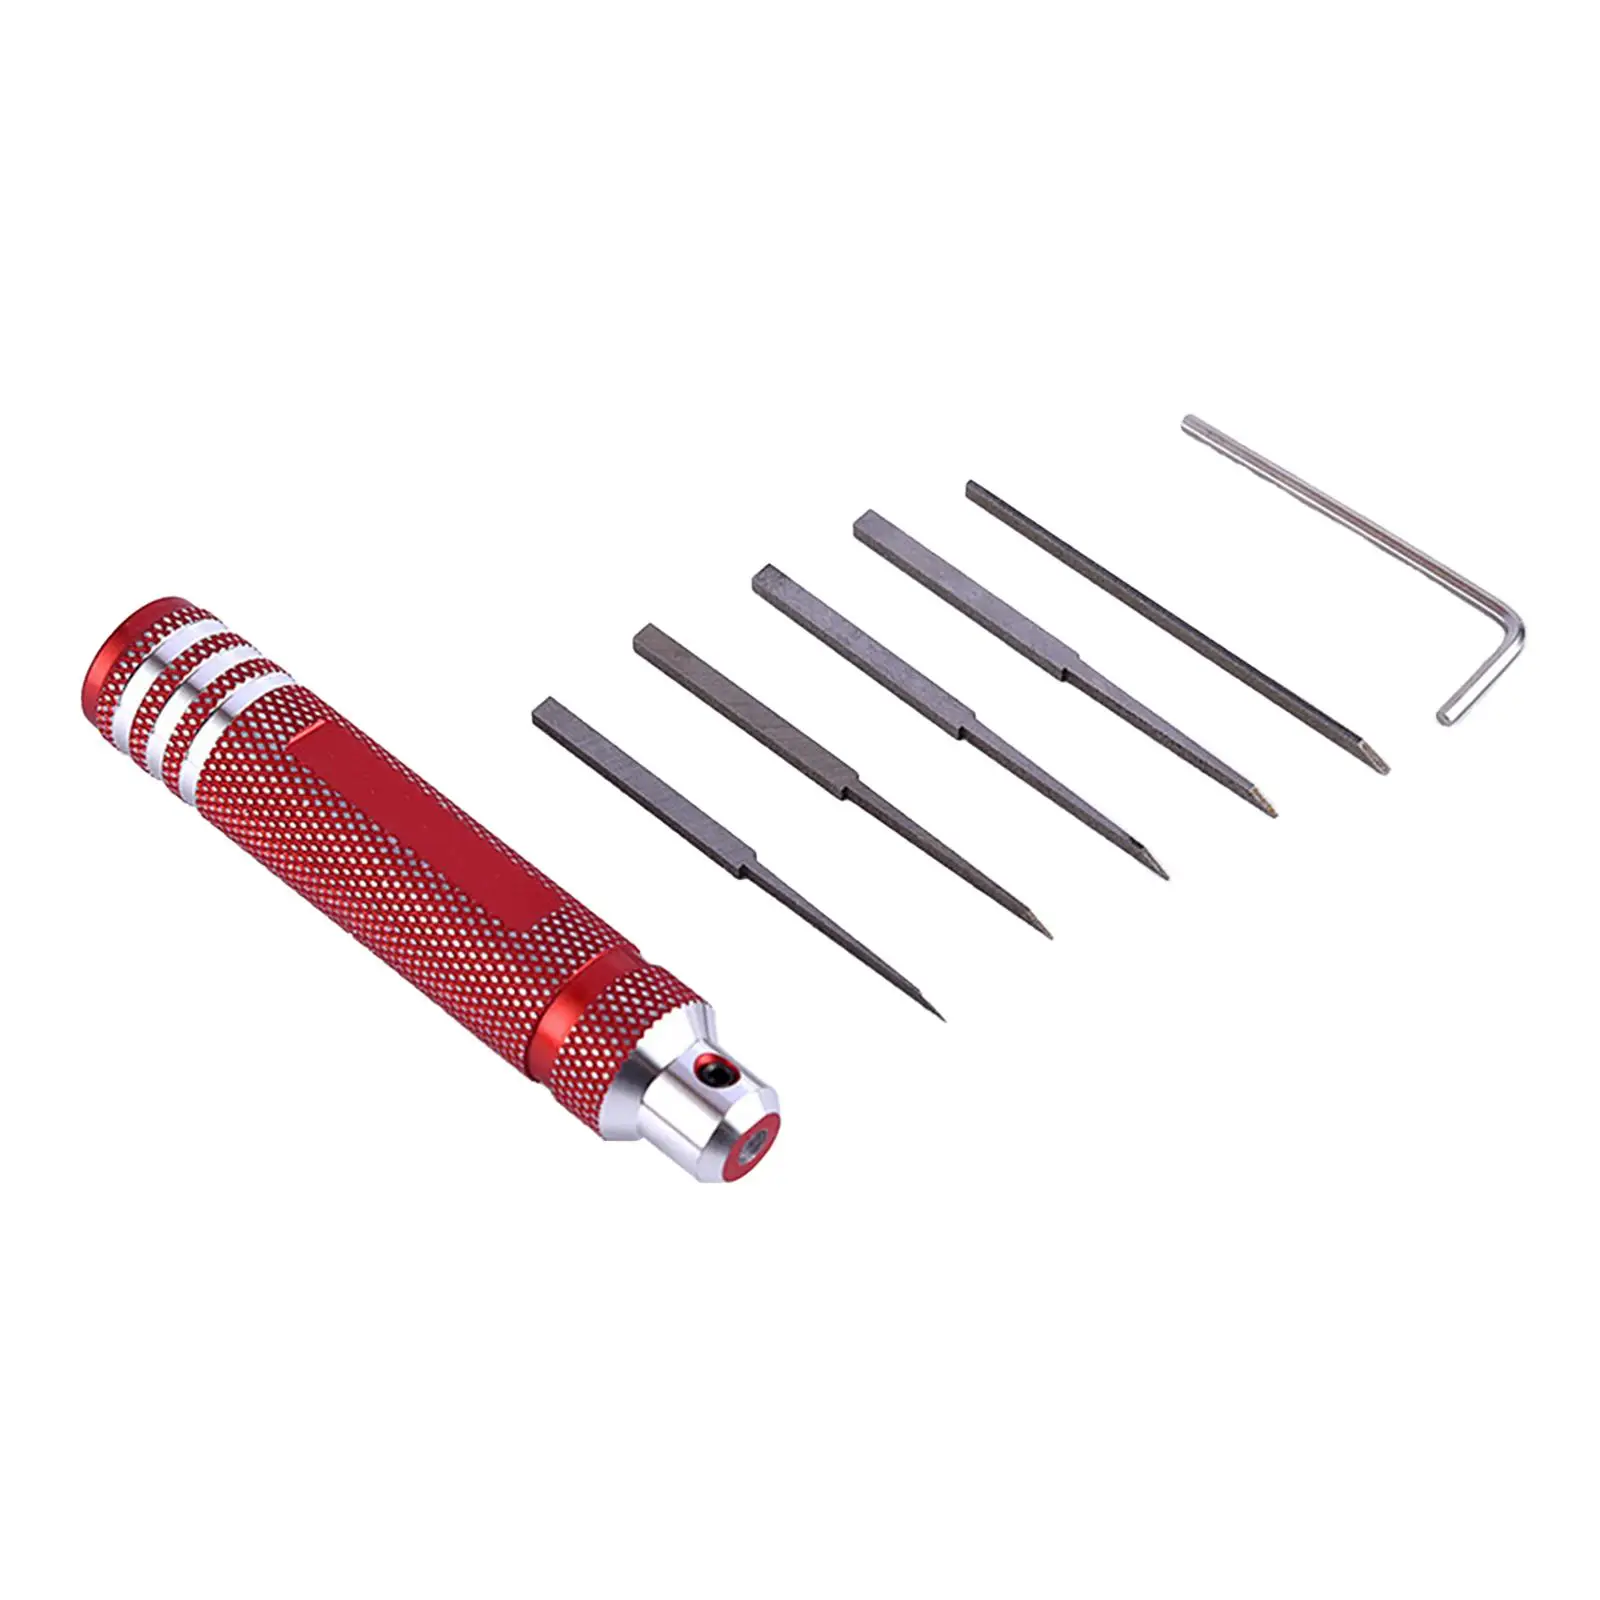 Model Scriber Tool Durable with Replace Blades Sharp Cutting Tool for Resin Carved Pottery Modeling Hobby Carving Clay Sculpture